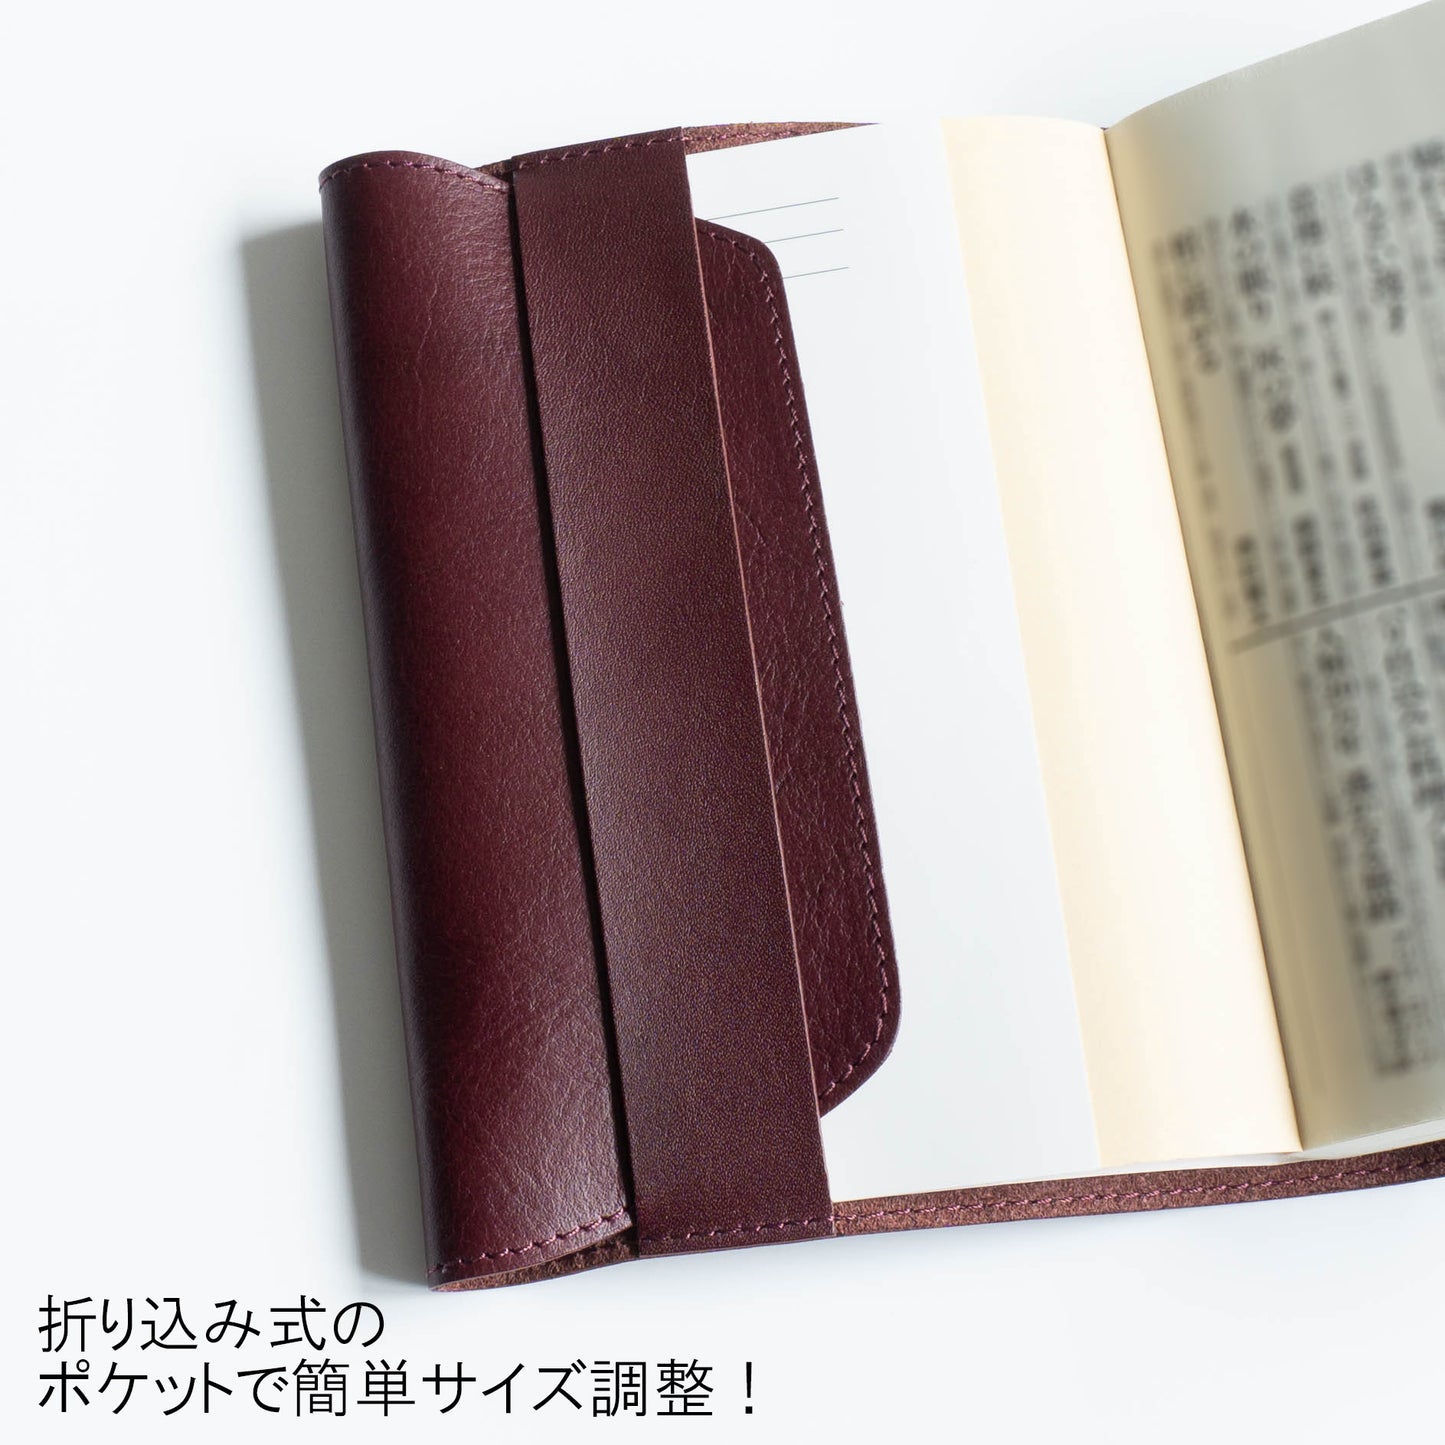 C&amp;L TRASCO ≪Zeaba Series≫ Book Cover A6/Paperback Size Genuine Leather (Antibacterial Processed Leather)